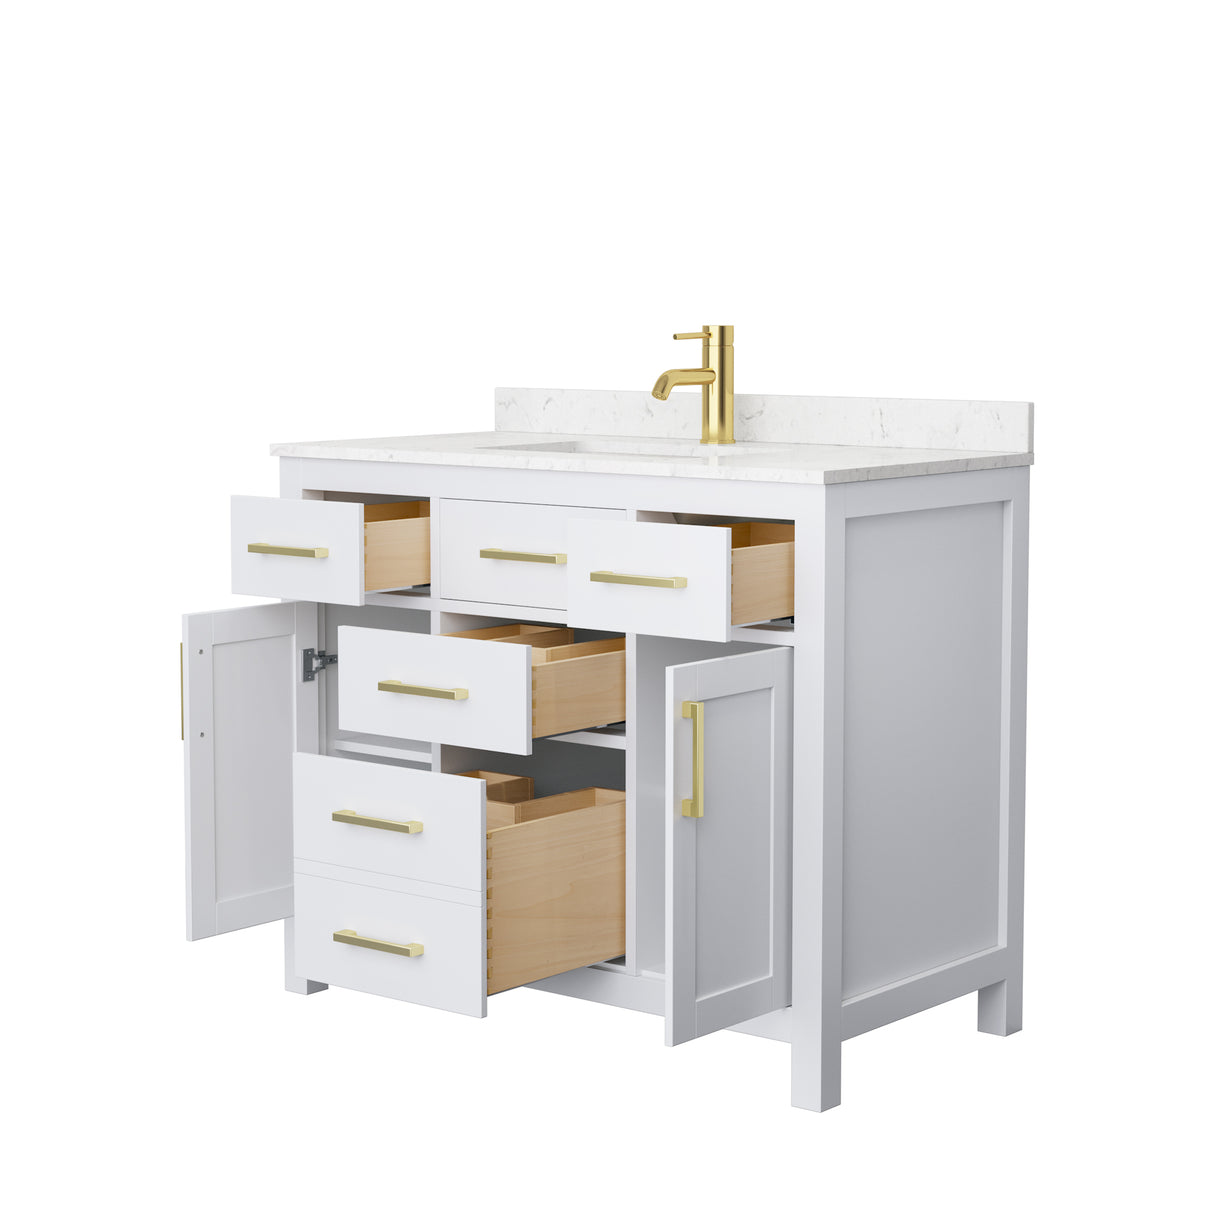 Beckett 42 Inch Single Bathroom Vanity in White Carrara Cultured Marble Countertop Undermount Square Sink Brushed Gold Trim